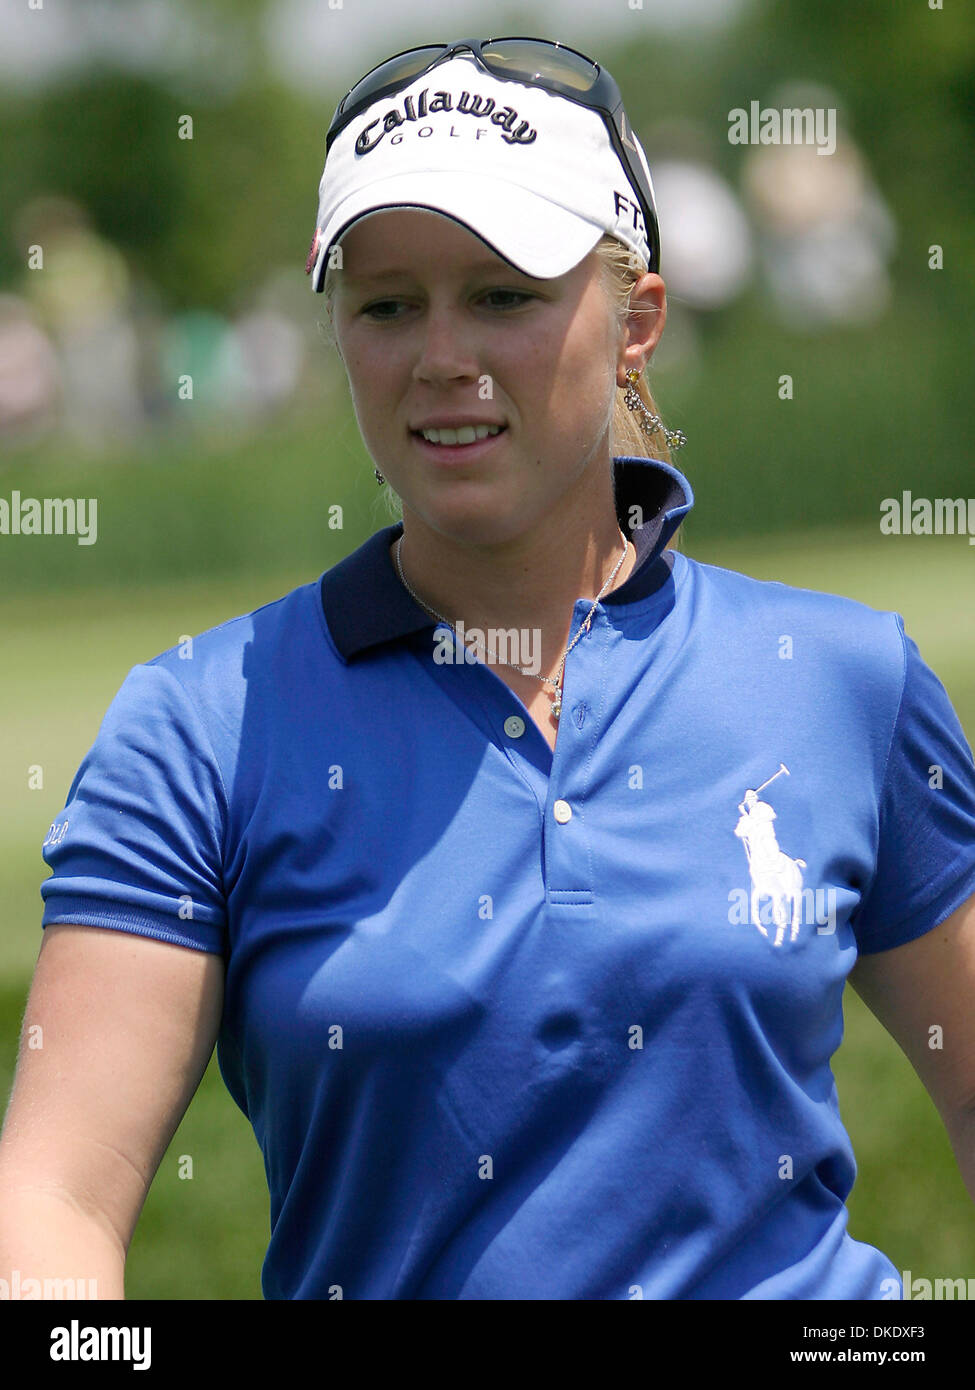 Jun 07, 2007 - Havre de Grace, Maryland, USA -  19 year old MORGAN PRESSEL after round 1 at the McDonalds LPGA Champaionship event on Thursday. Pressel finished the first round tied for 4th place at 4 under par.   (Credit Image: © James Berglie/ZUMA Press) Stock Photo